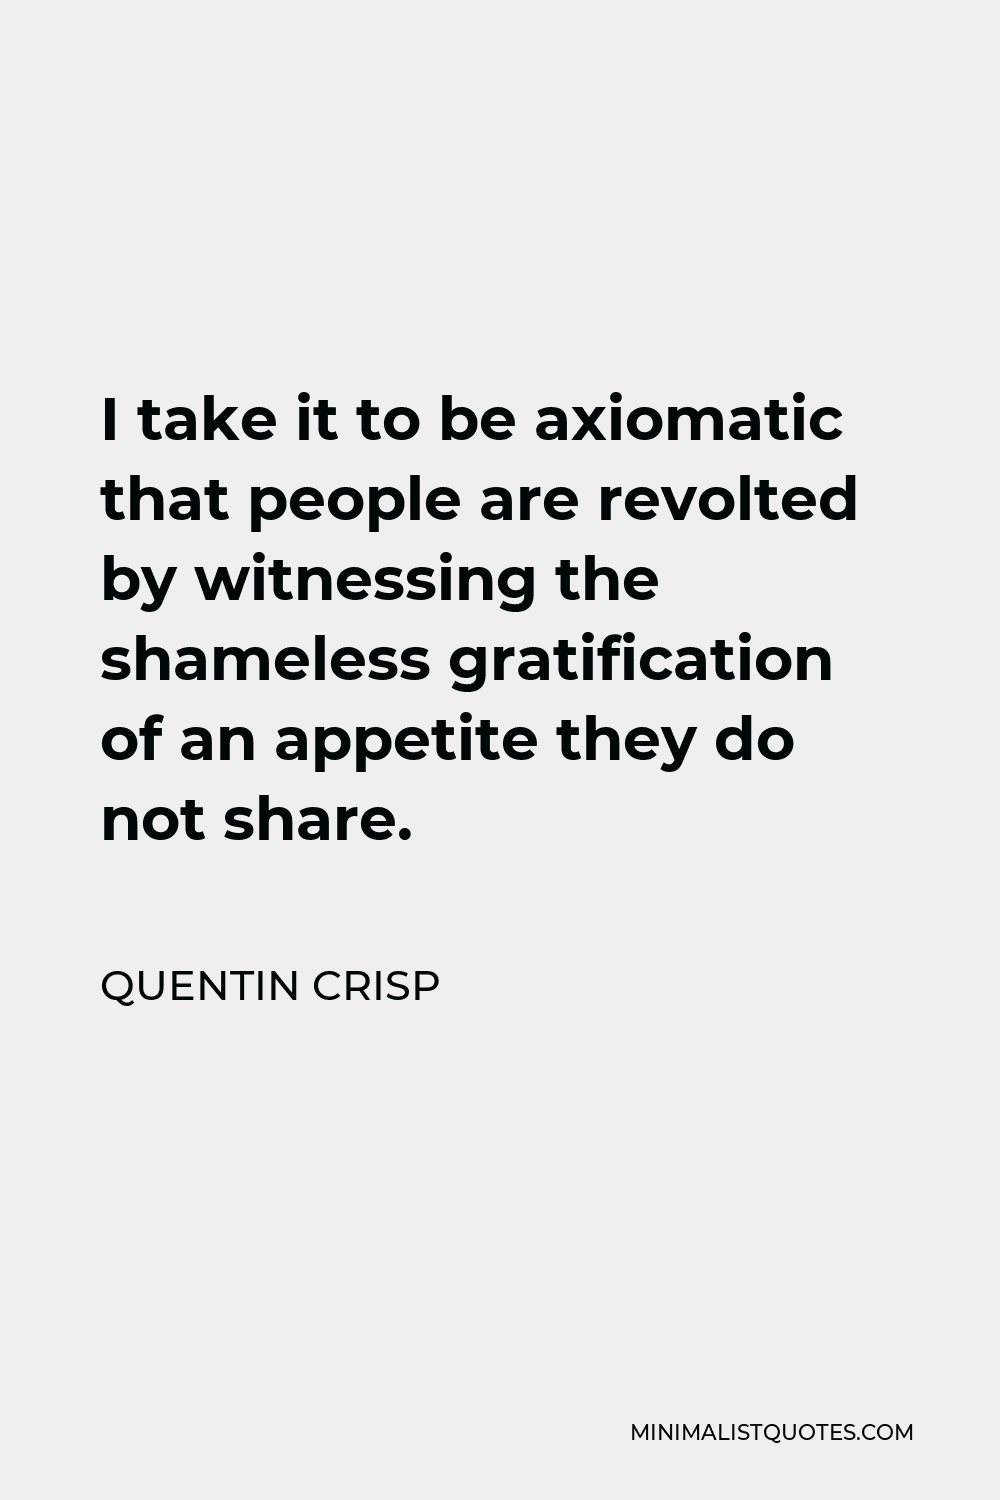 Quentin Crisp Quote - I take it to be axiomatic that people are revolted by witnessing the shameless gratification of an appetite they do not share.